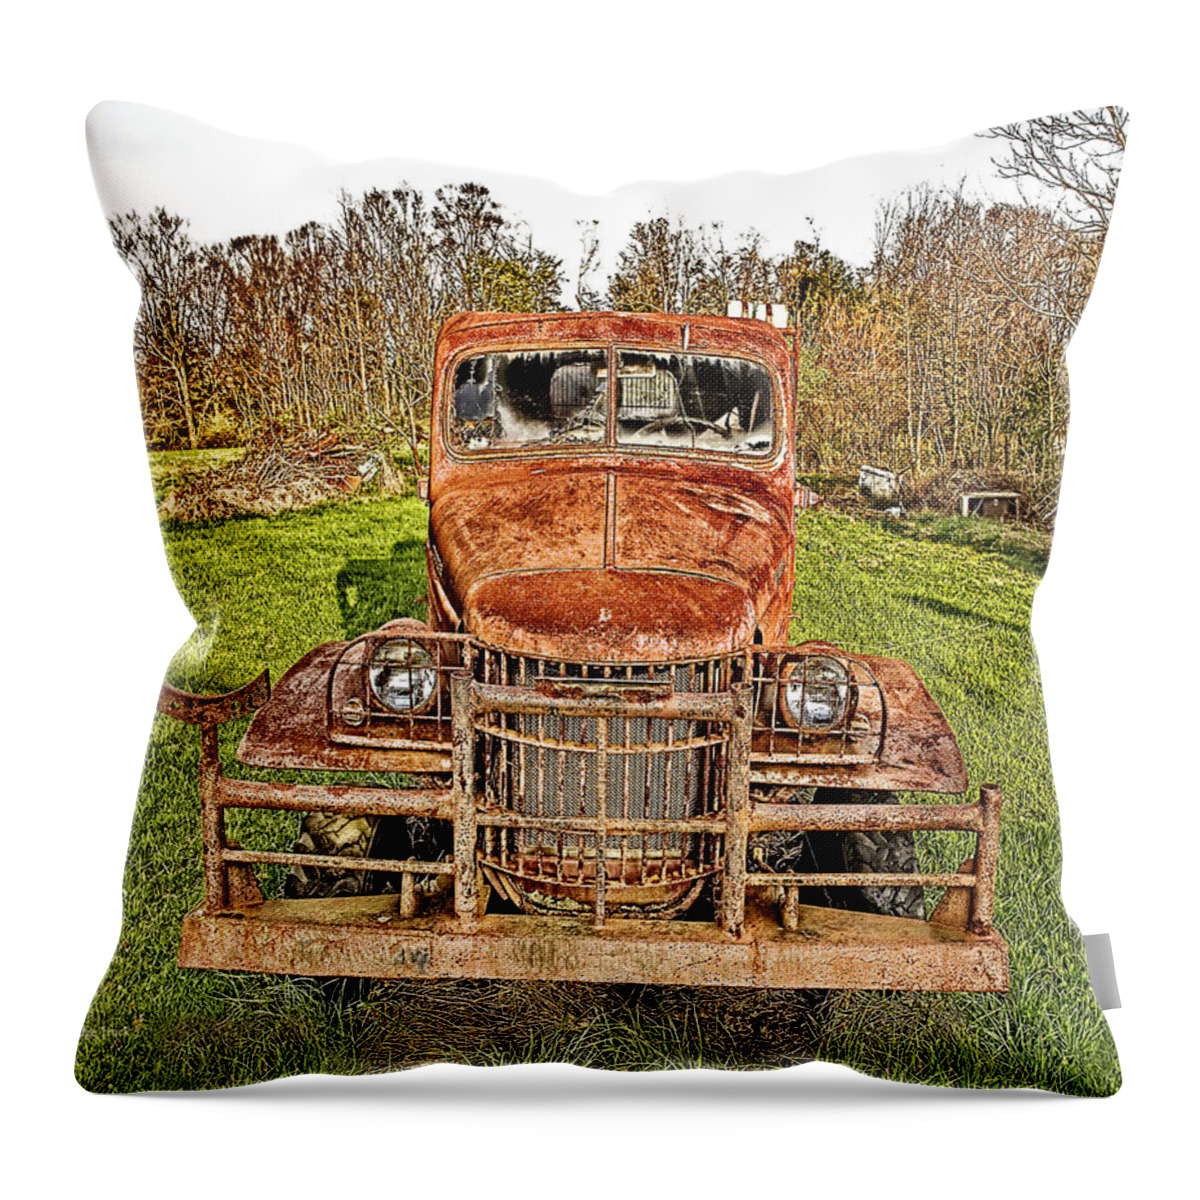 Scenicfotos Throw Pillow featuring the photograph 1941 Dodge Truck 3 by Mark Allen